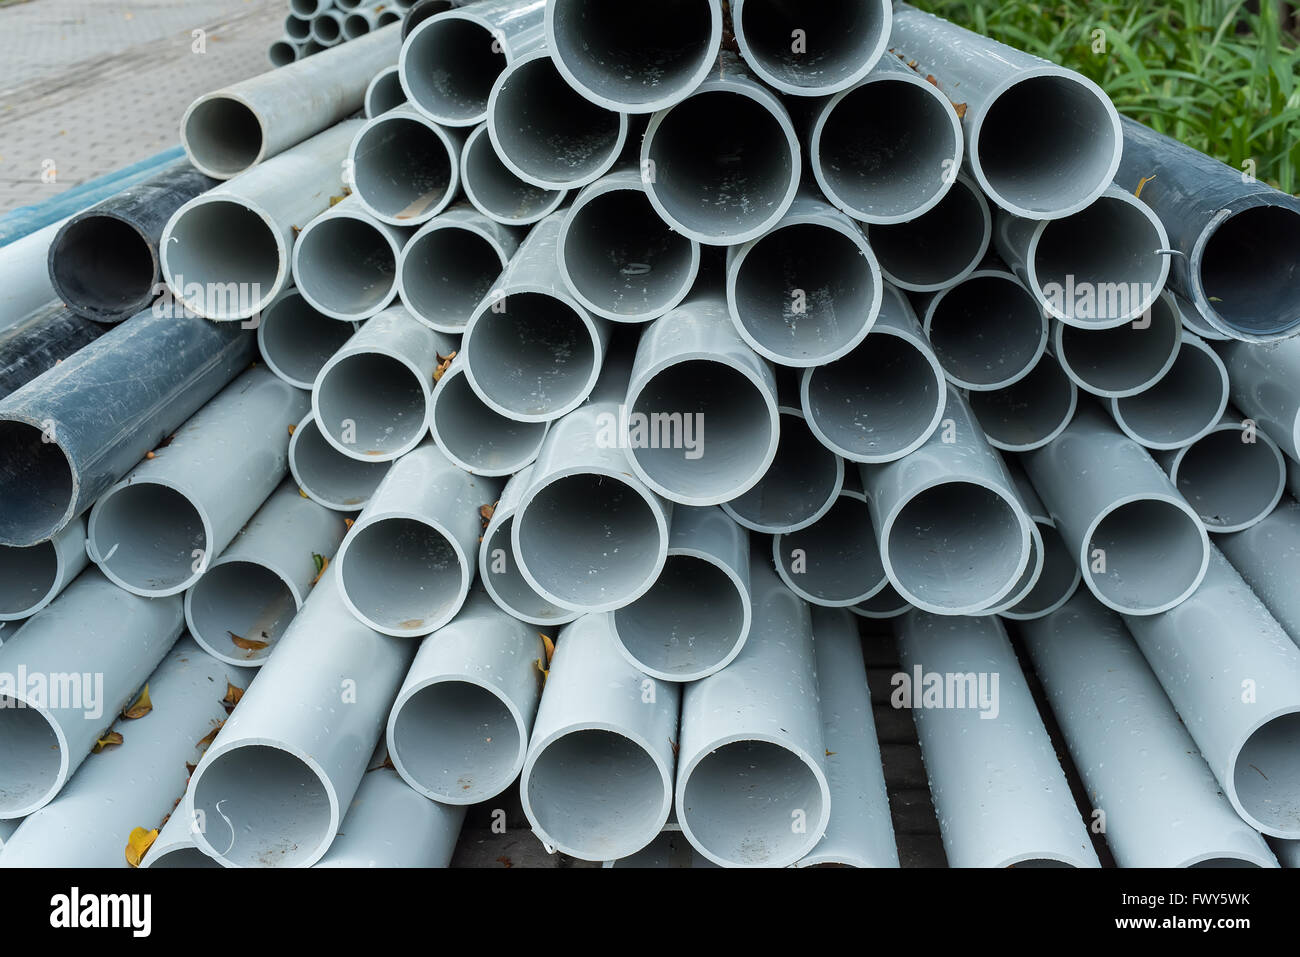 pvc pipes close up Stock Photo